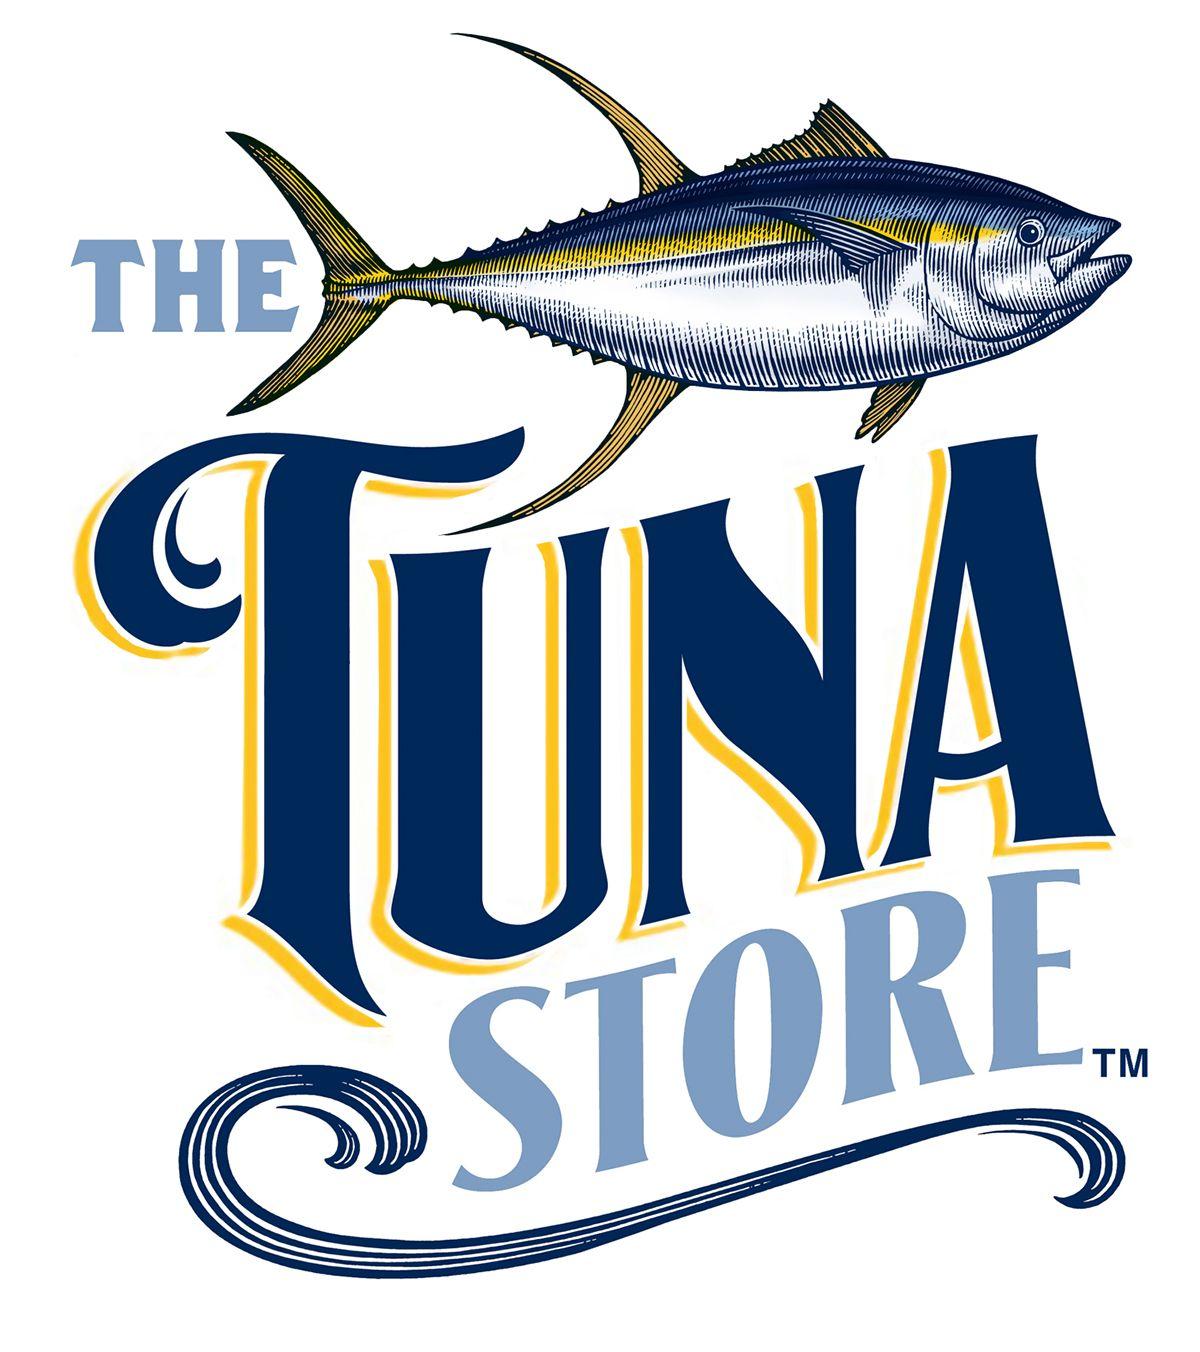 Tuna Logo - The Tuna Store Logo Illustrated by Steven Noble on Behance